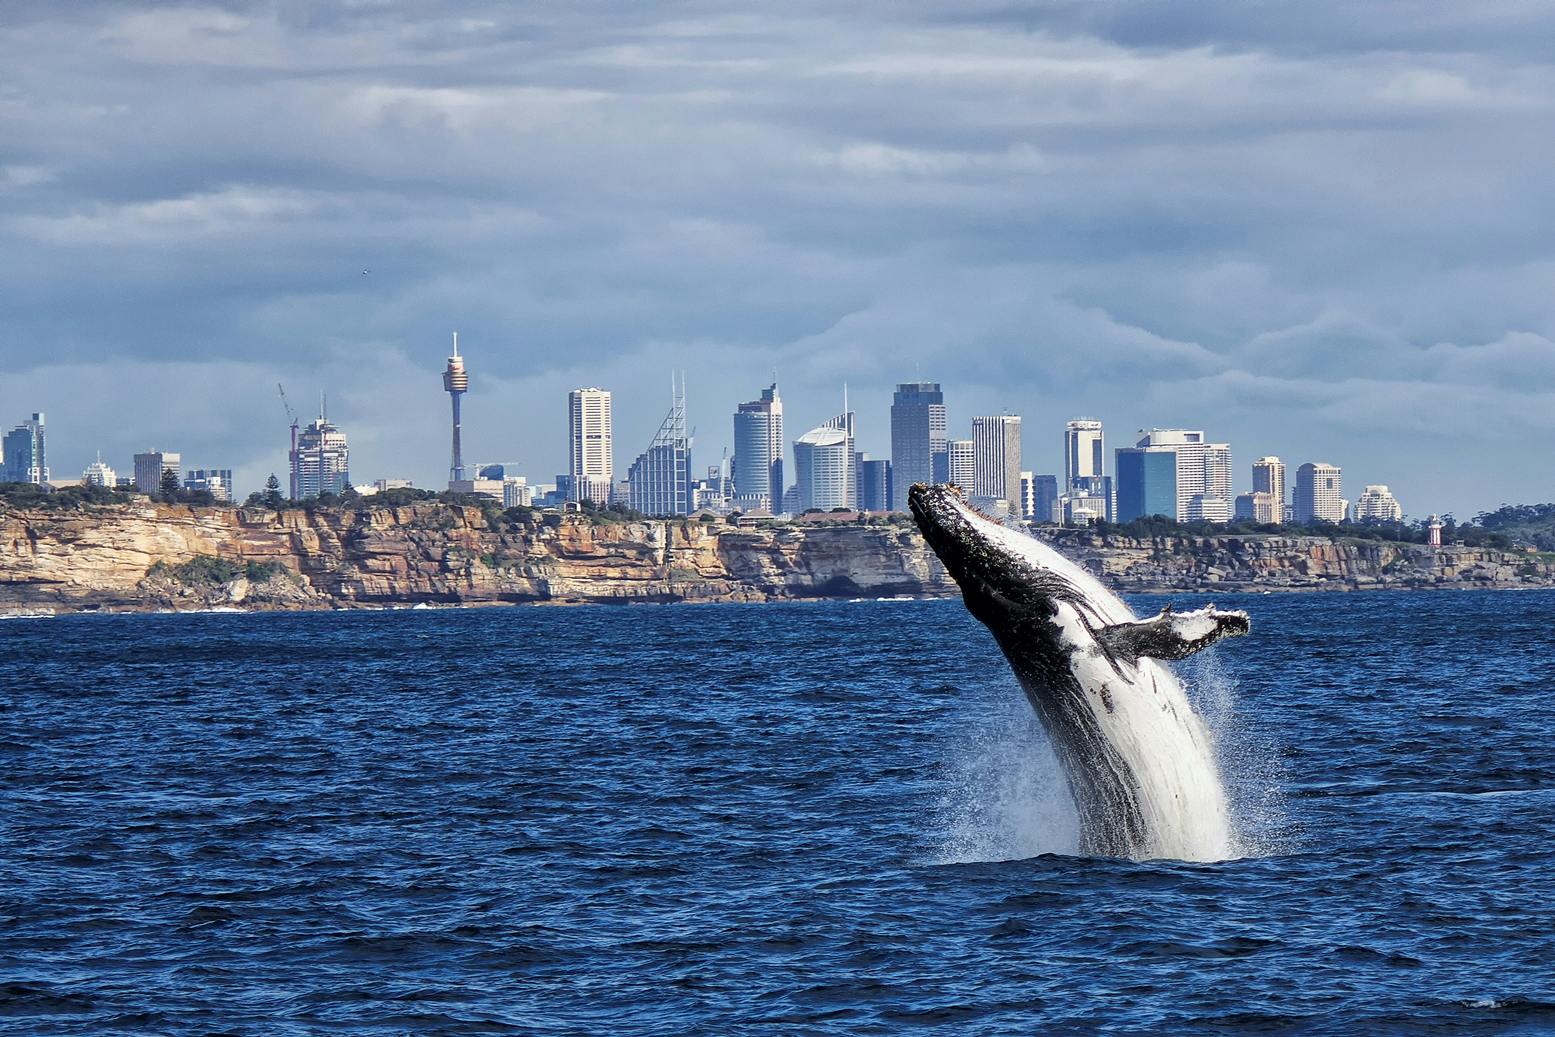 Sydney whale-watching cruise with breakfast or lunch